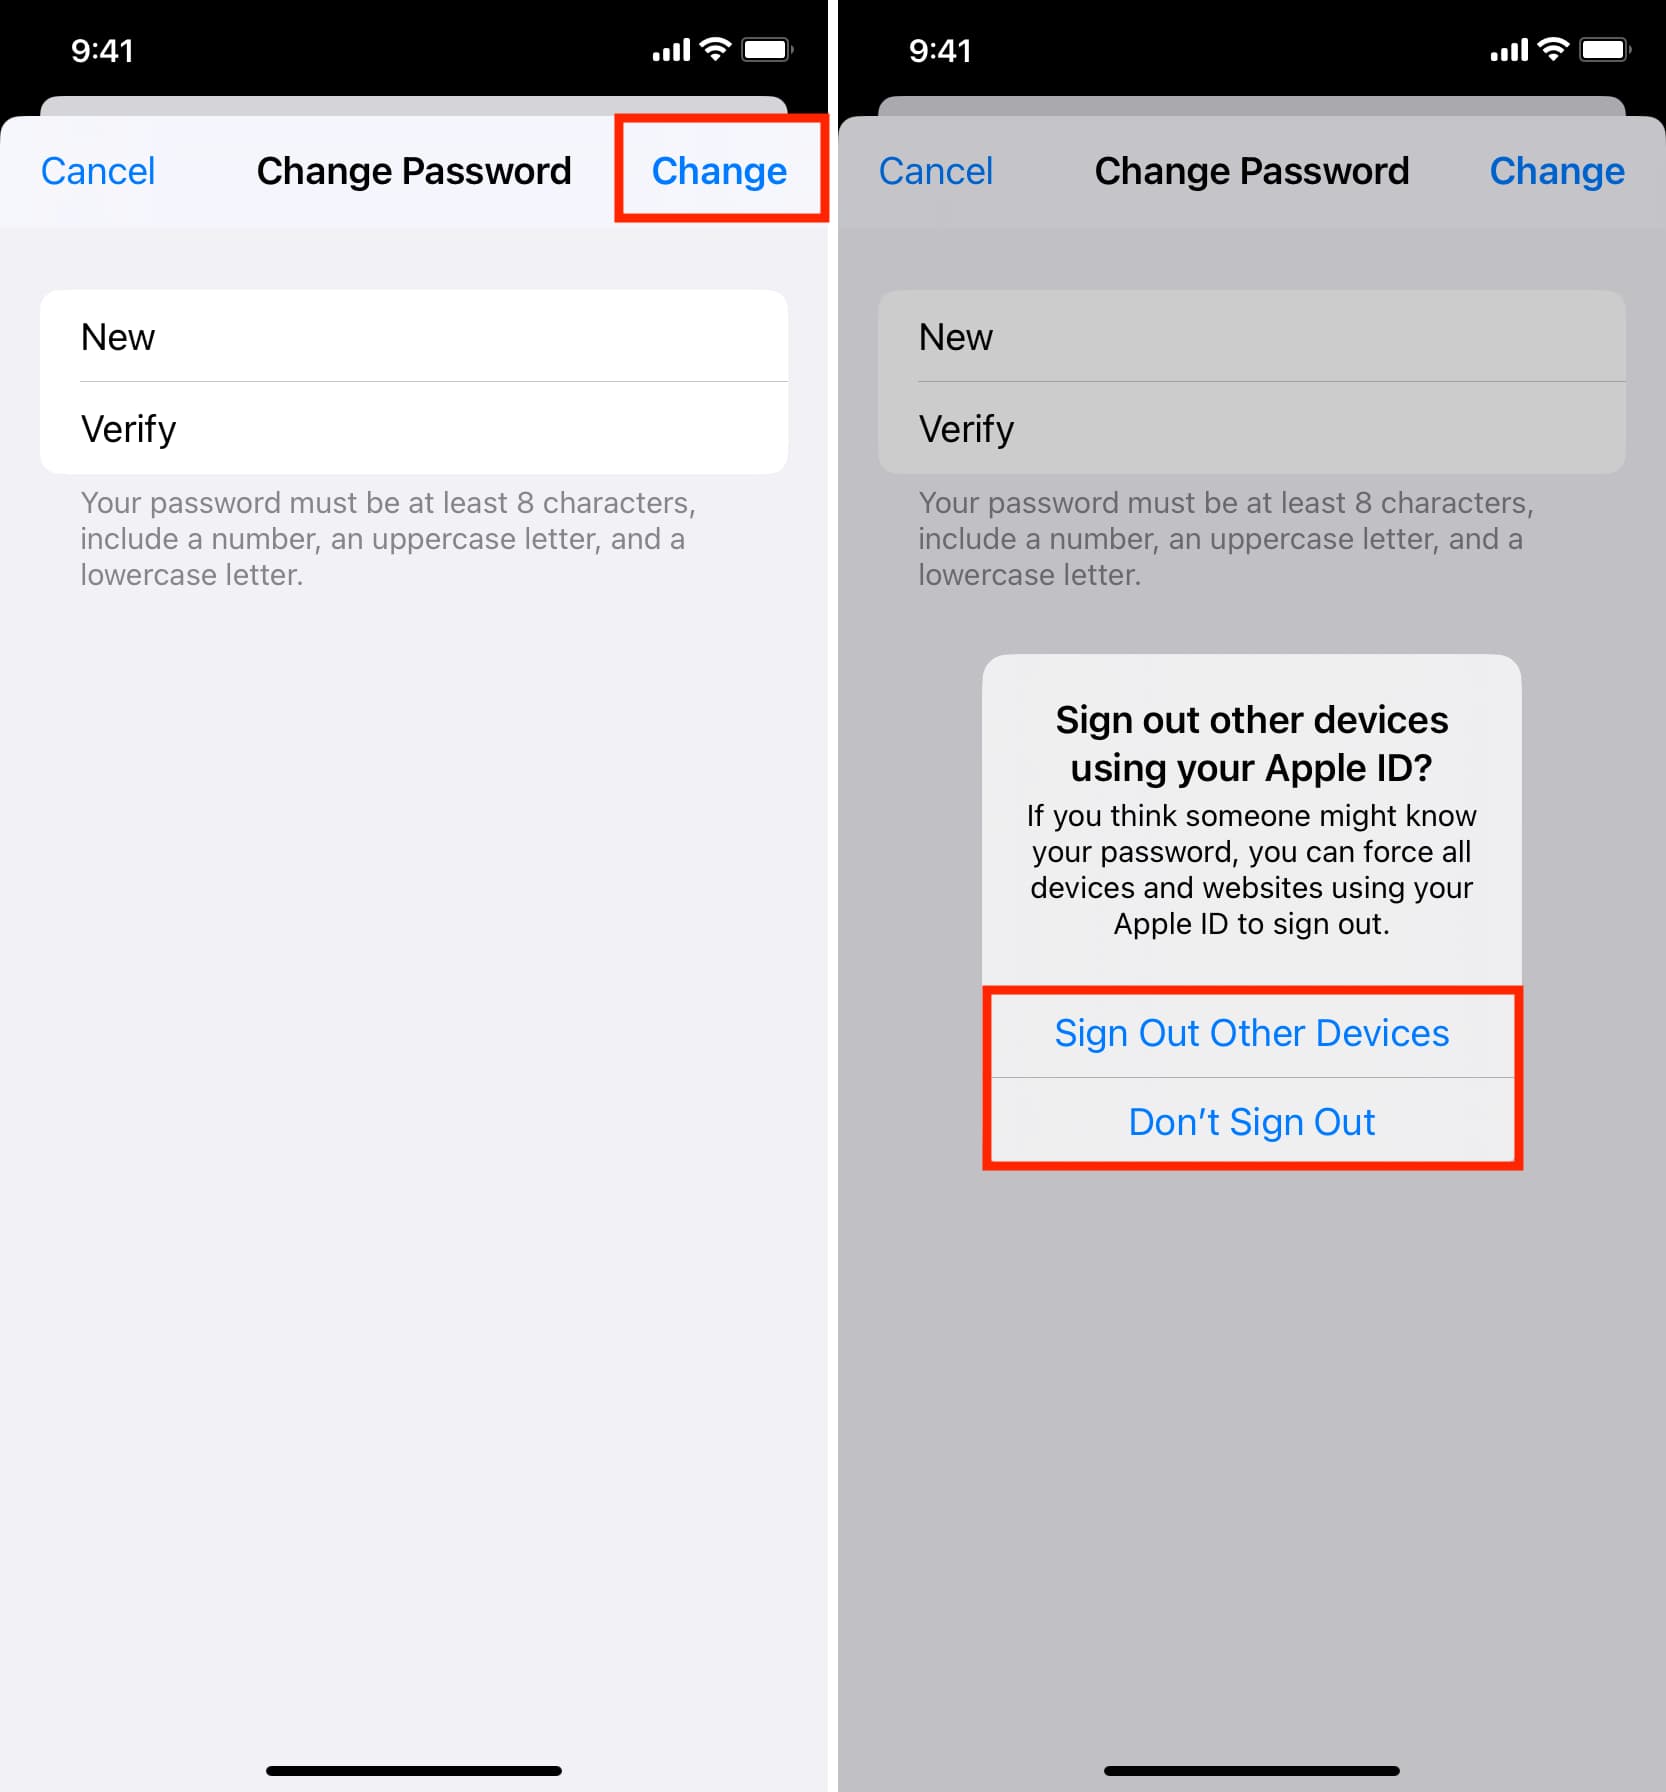 Enter new Apple ID password and choose to sign out of all devices